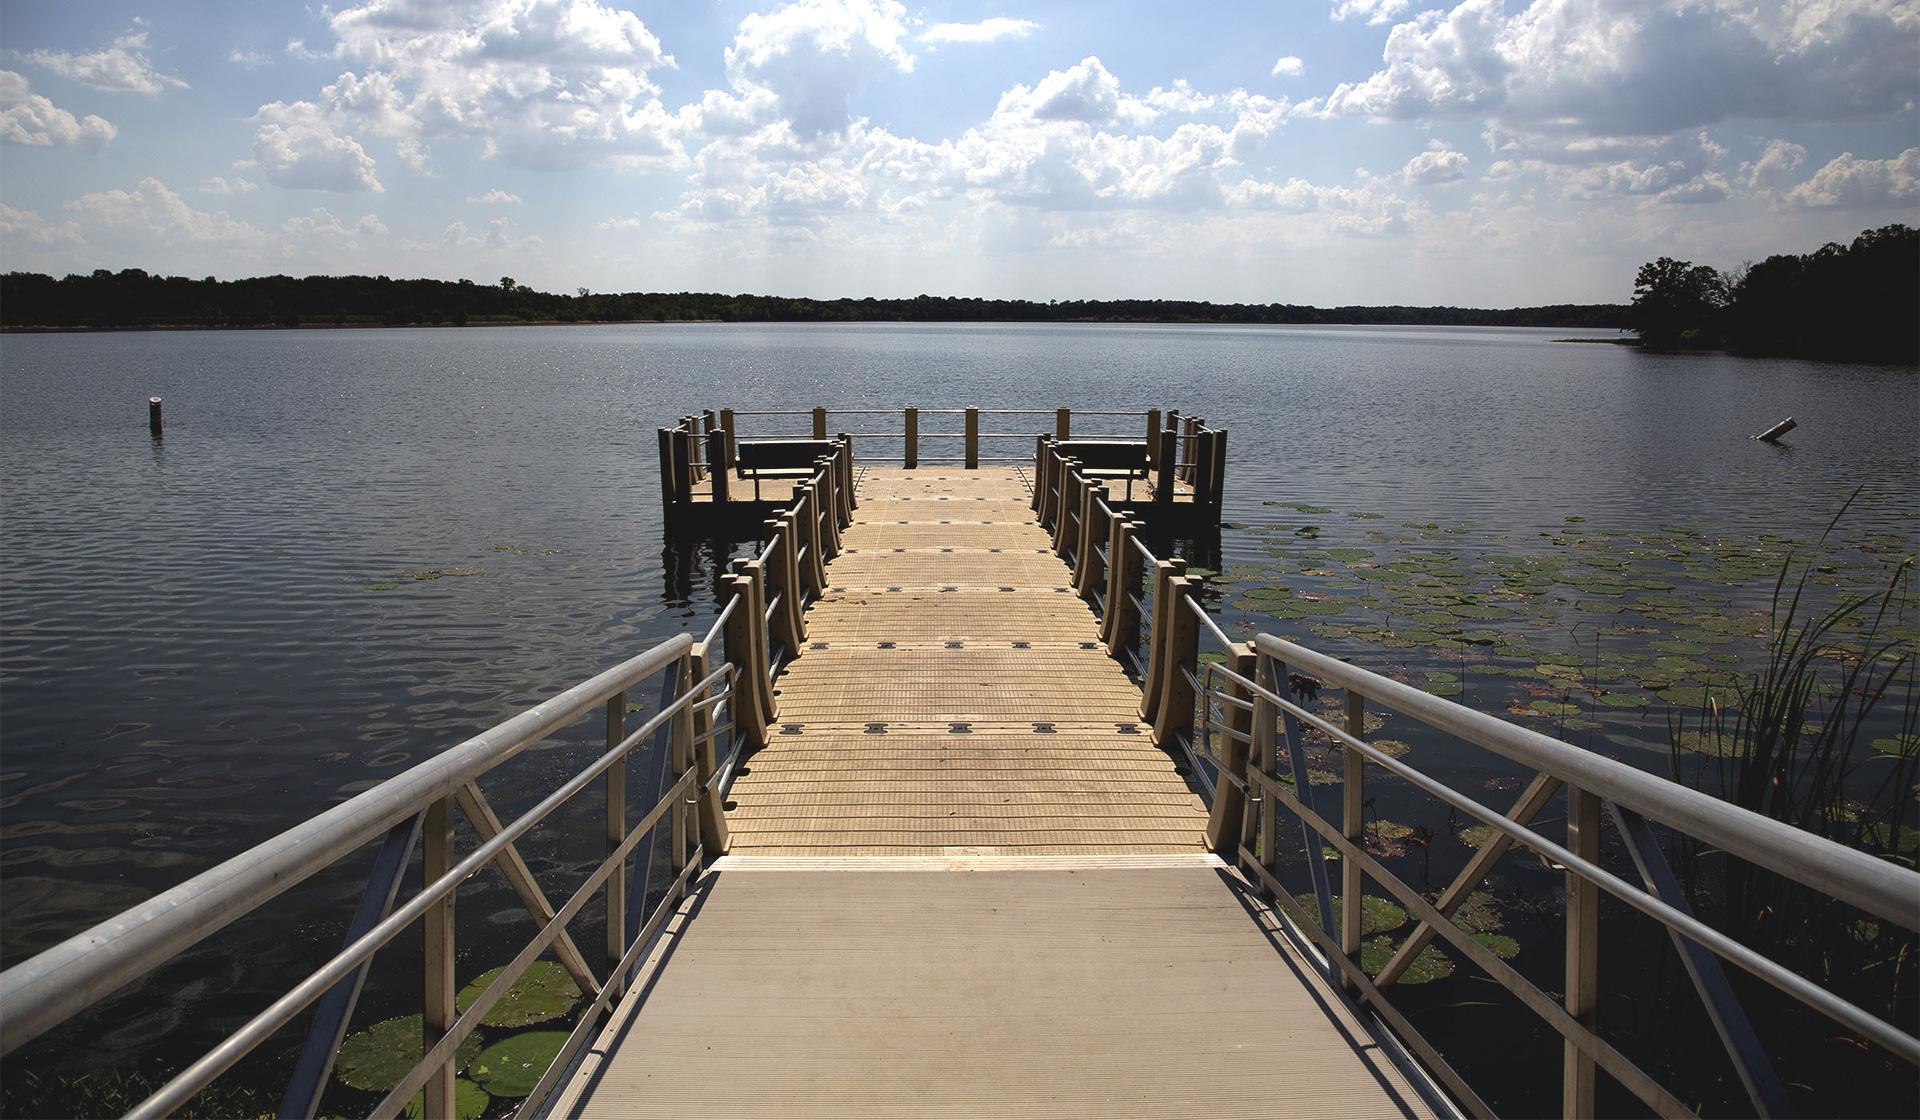 Image shows a wooden pier extending out into a blue lake with clear skies overhead.